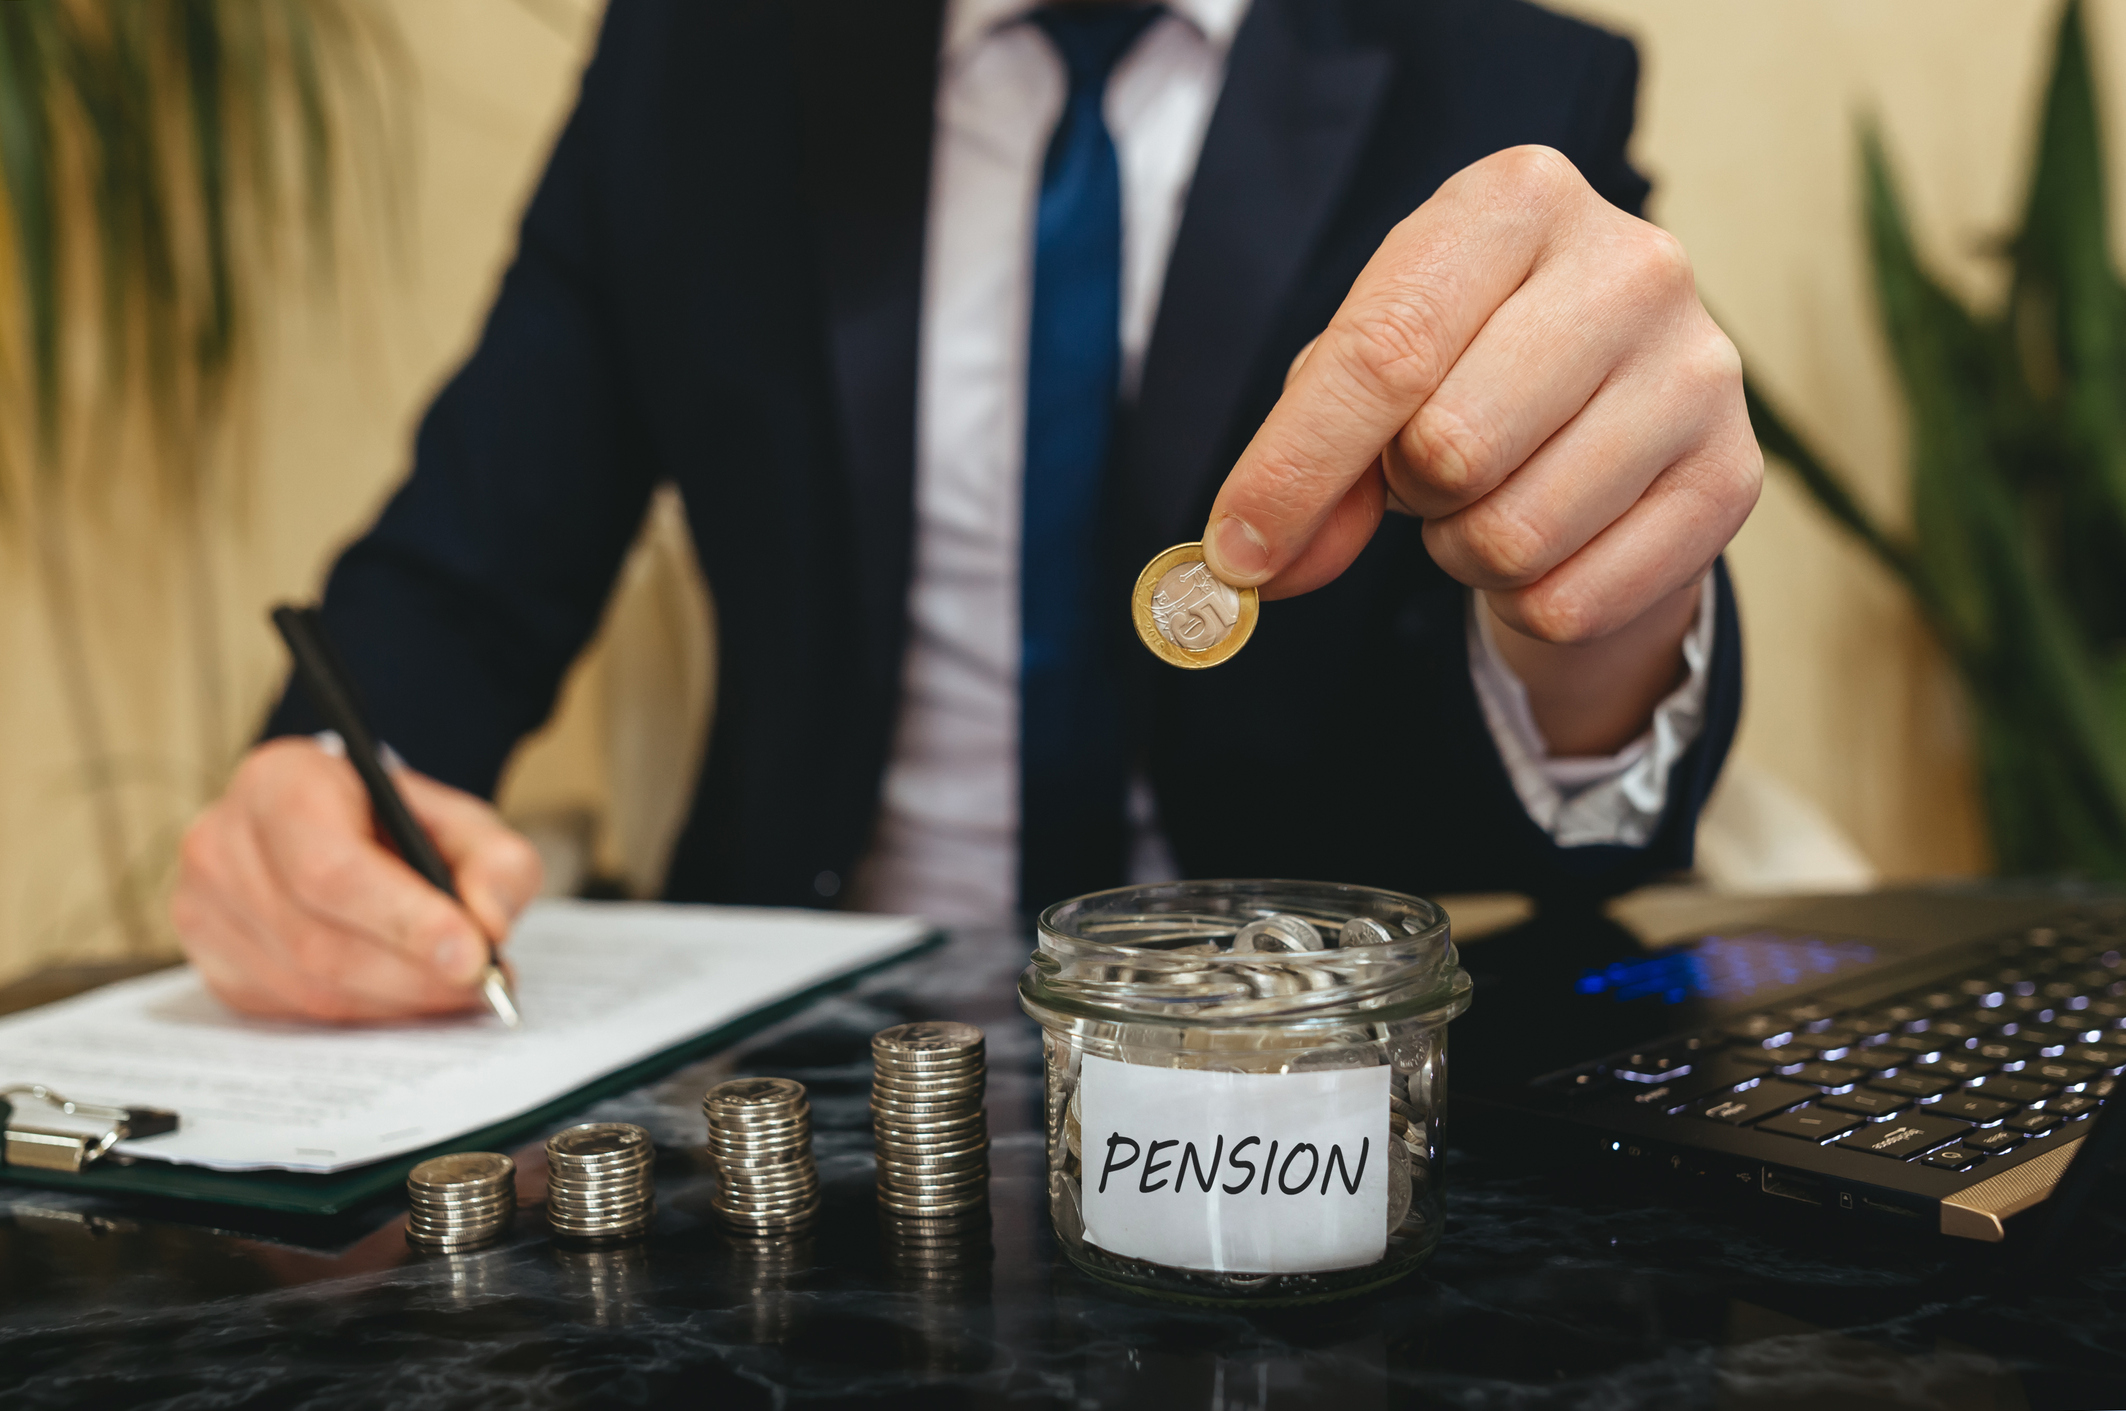 Why choose an Executive Pension (EP) for Wealth Extraction?